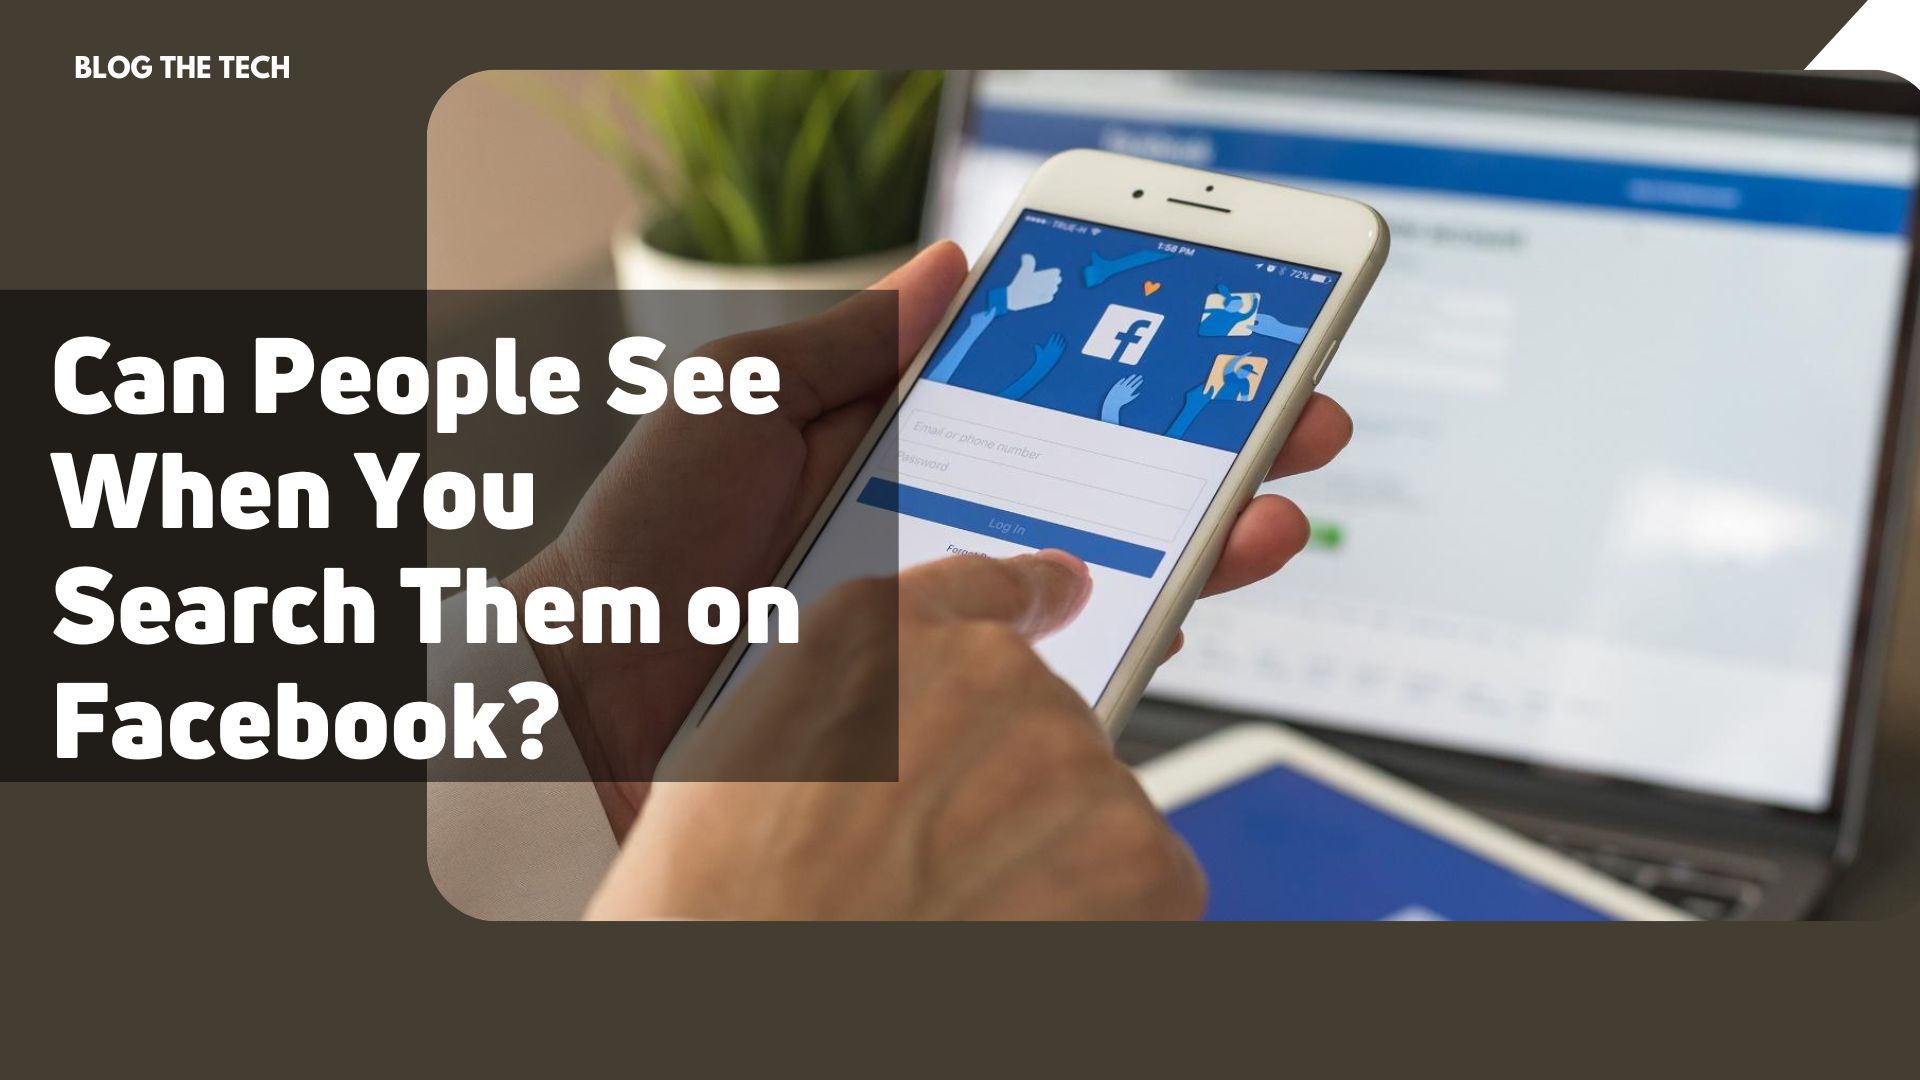 Can People See When You Search Them on Facebook?